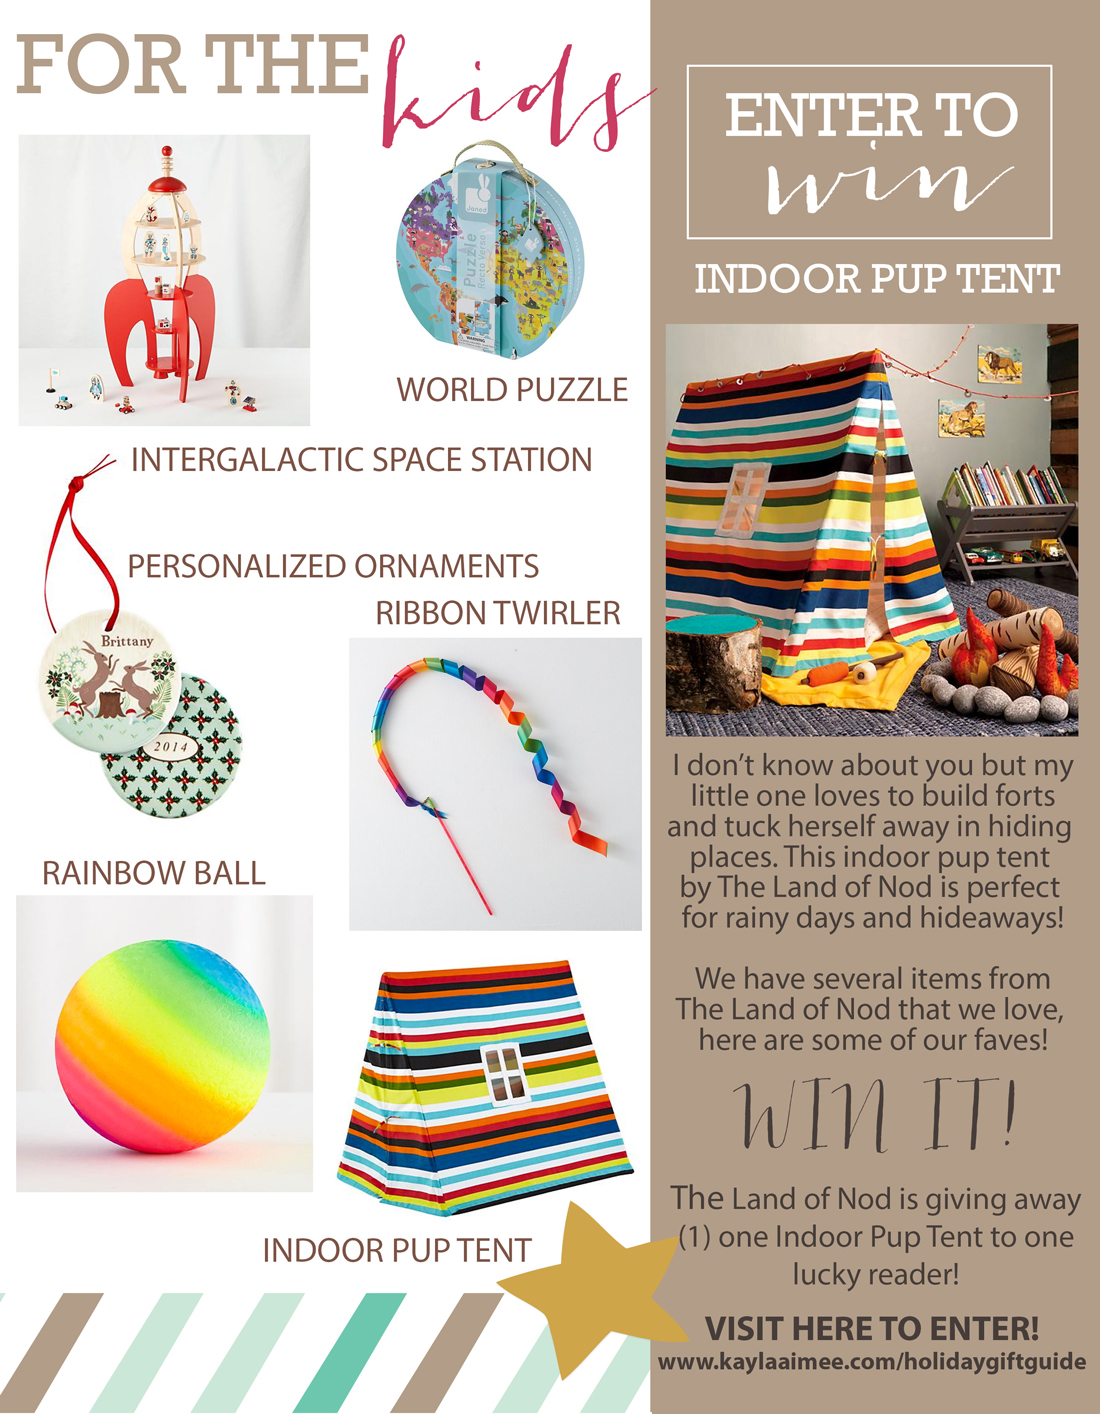 This 2014 Holiday Gift Guide has the best cool and creative gift ideas for kids, plus a giveaway from The Land of Nod 